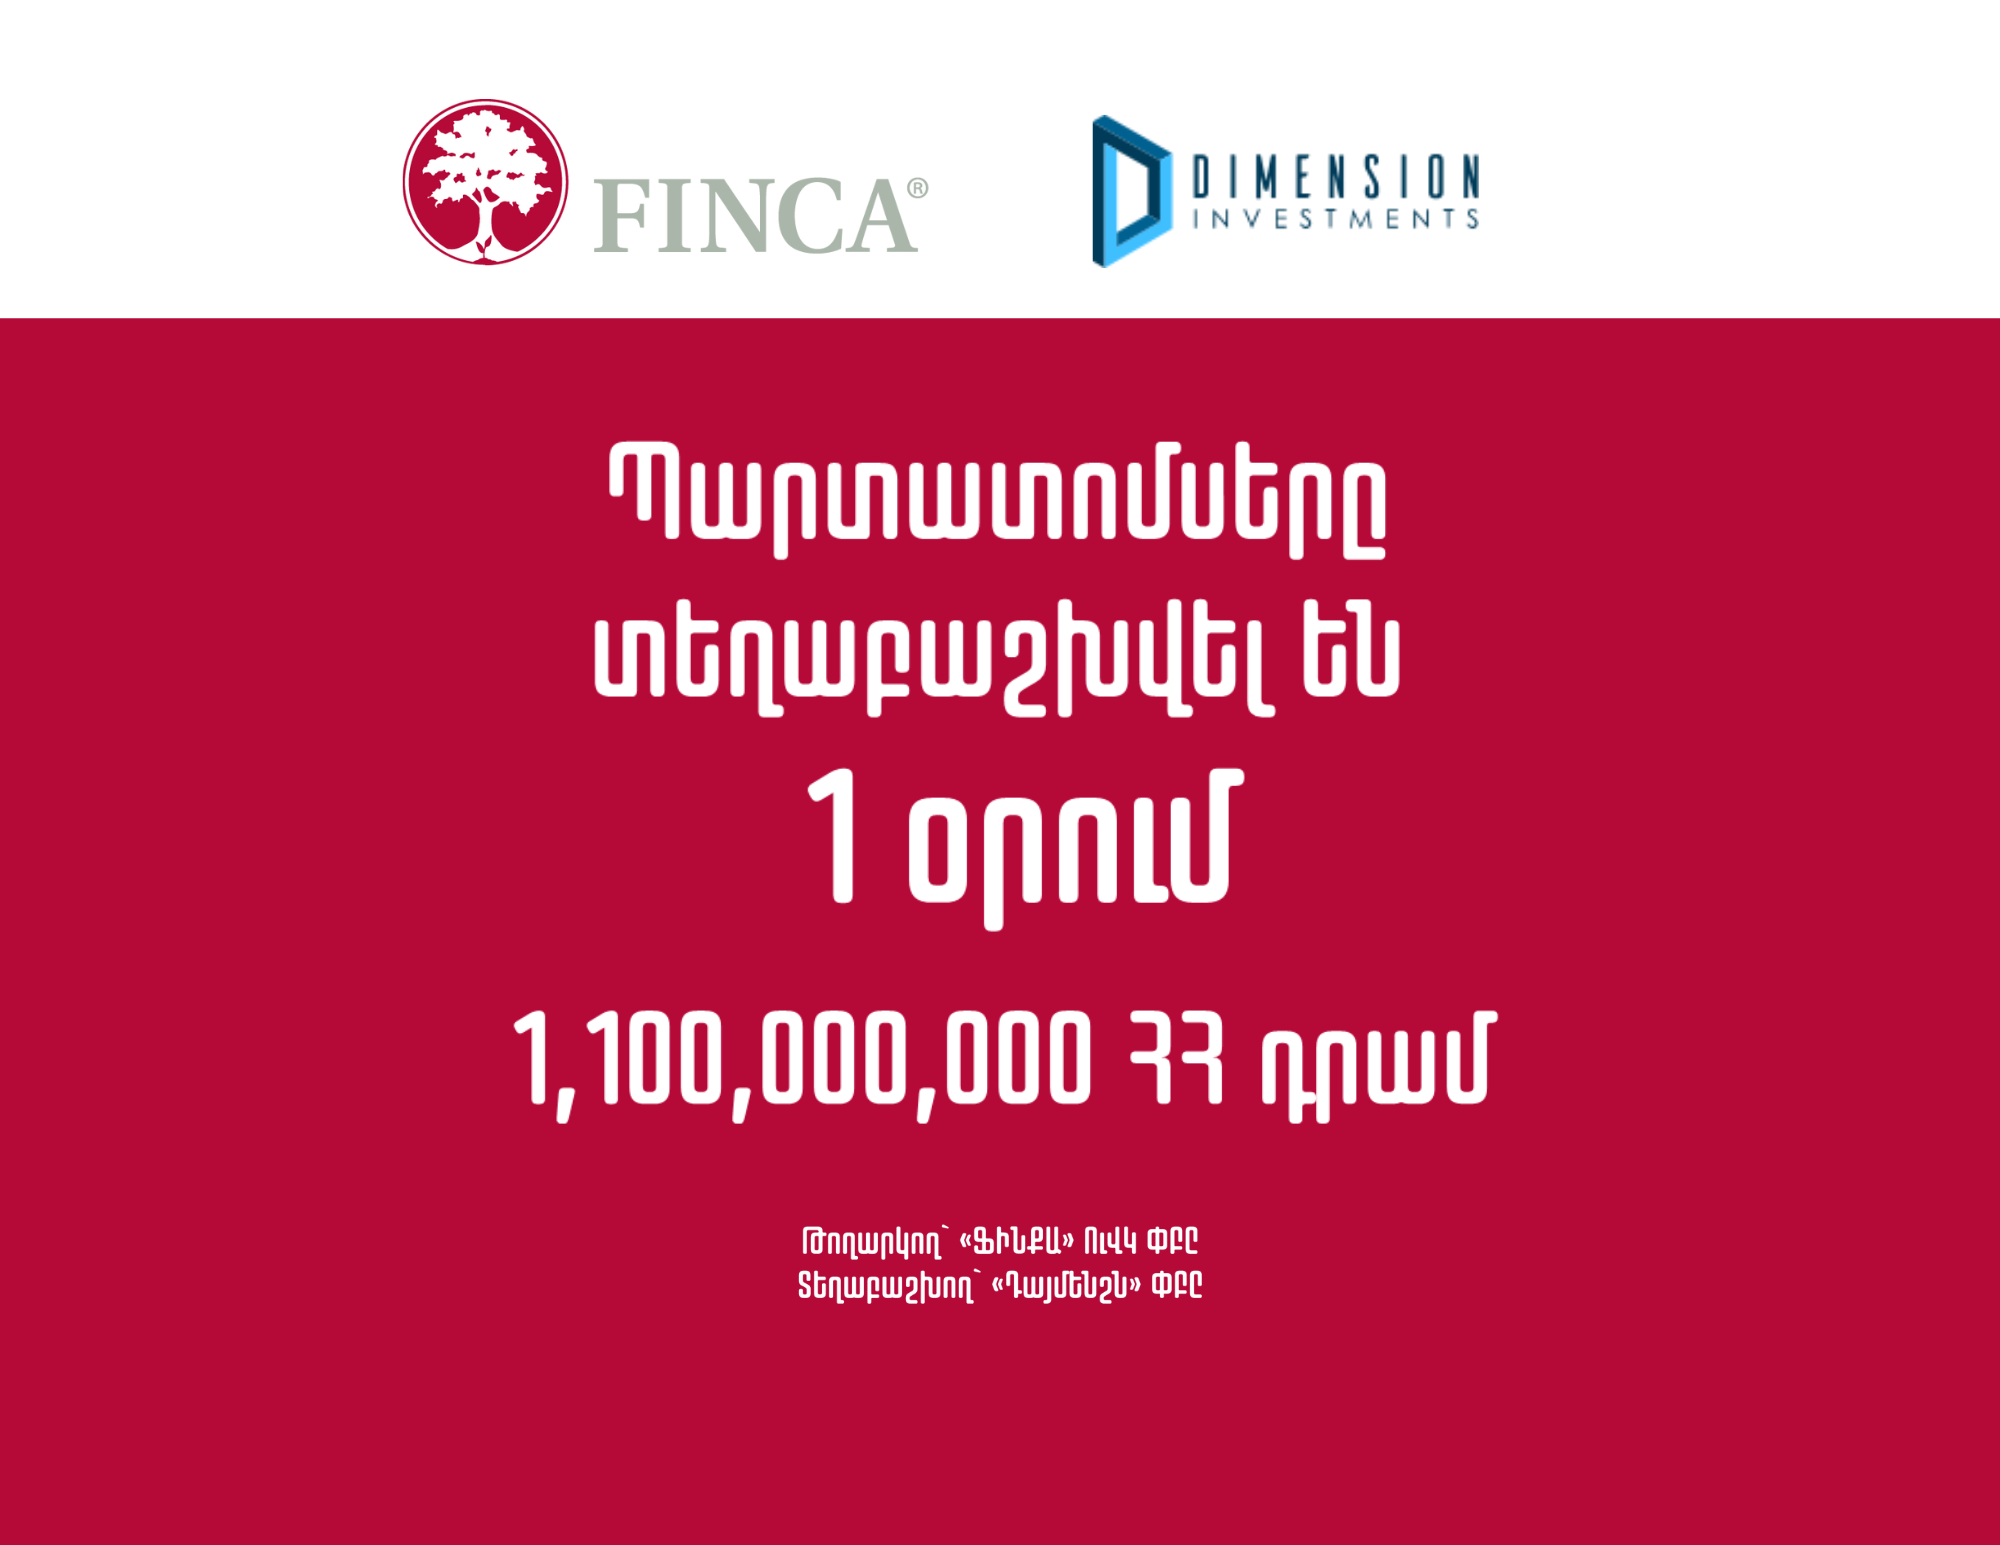 Dimension Investments has successfully completed the allocation of Finca UCO CJSC’s AMD-denominated 12․00% fixed-rate coupon bonds.